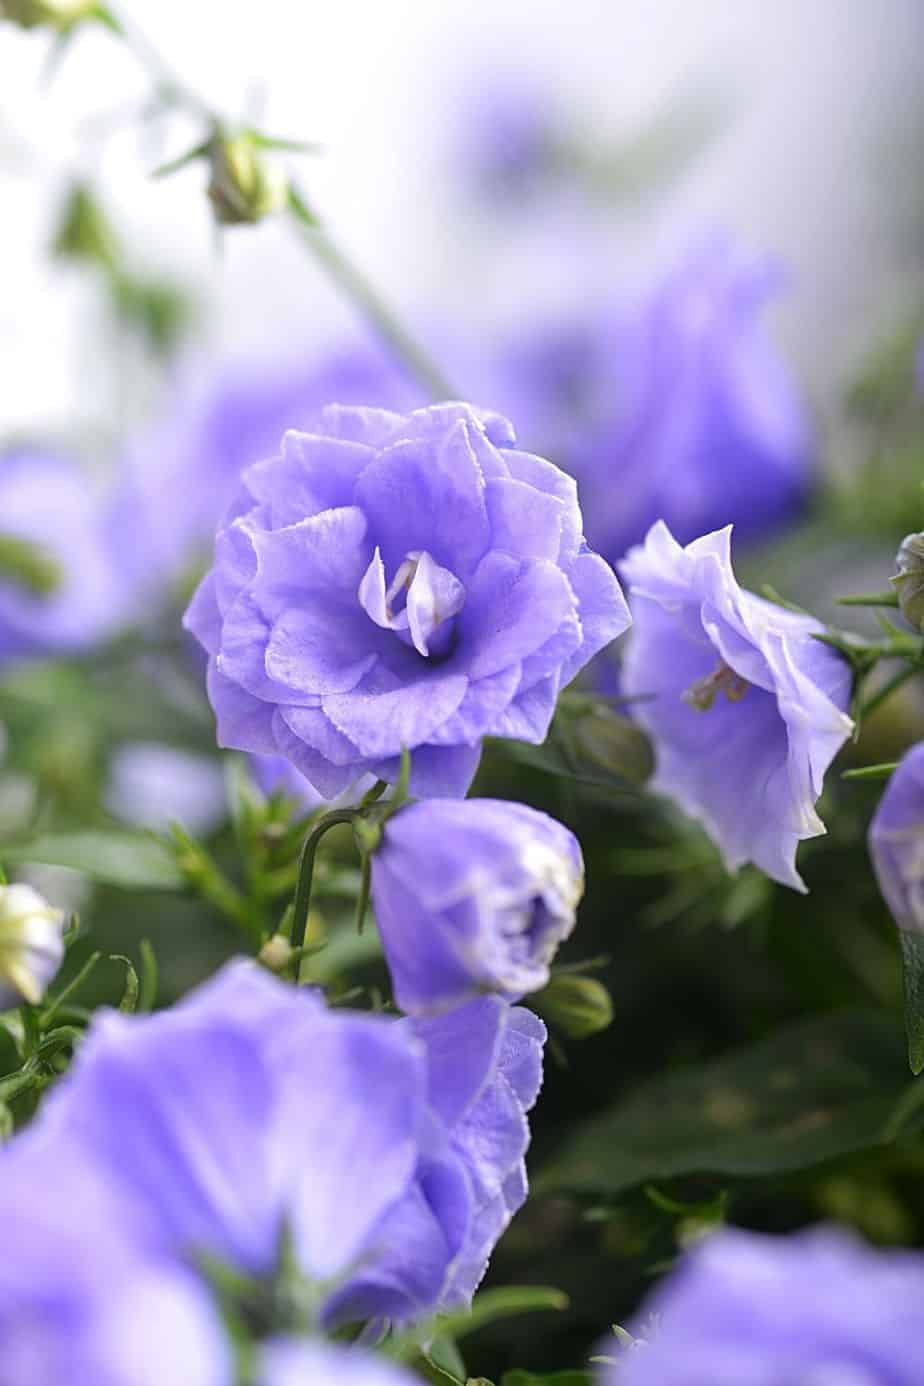 Known for its cup-shaped flowers looking like tiny Christmas bells, Campanula (Bellflower) will thrive in a northwest facing garden